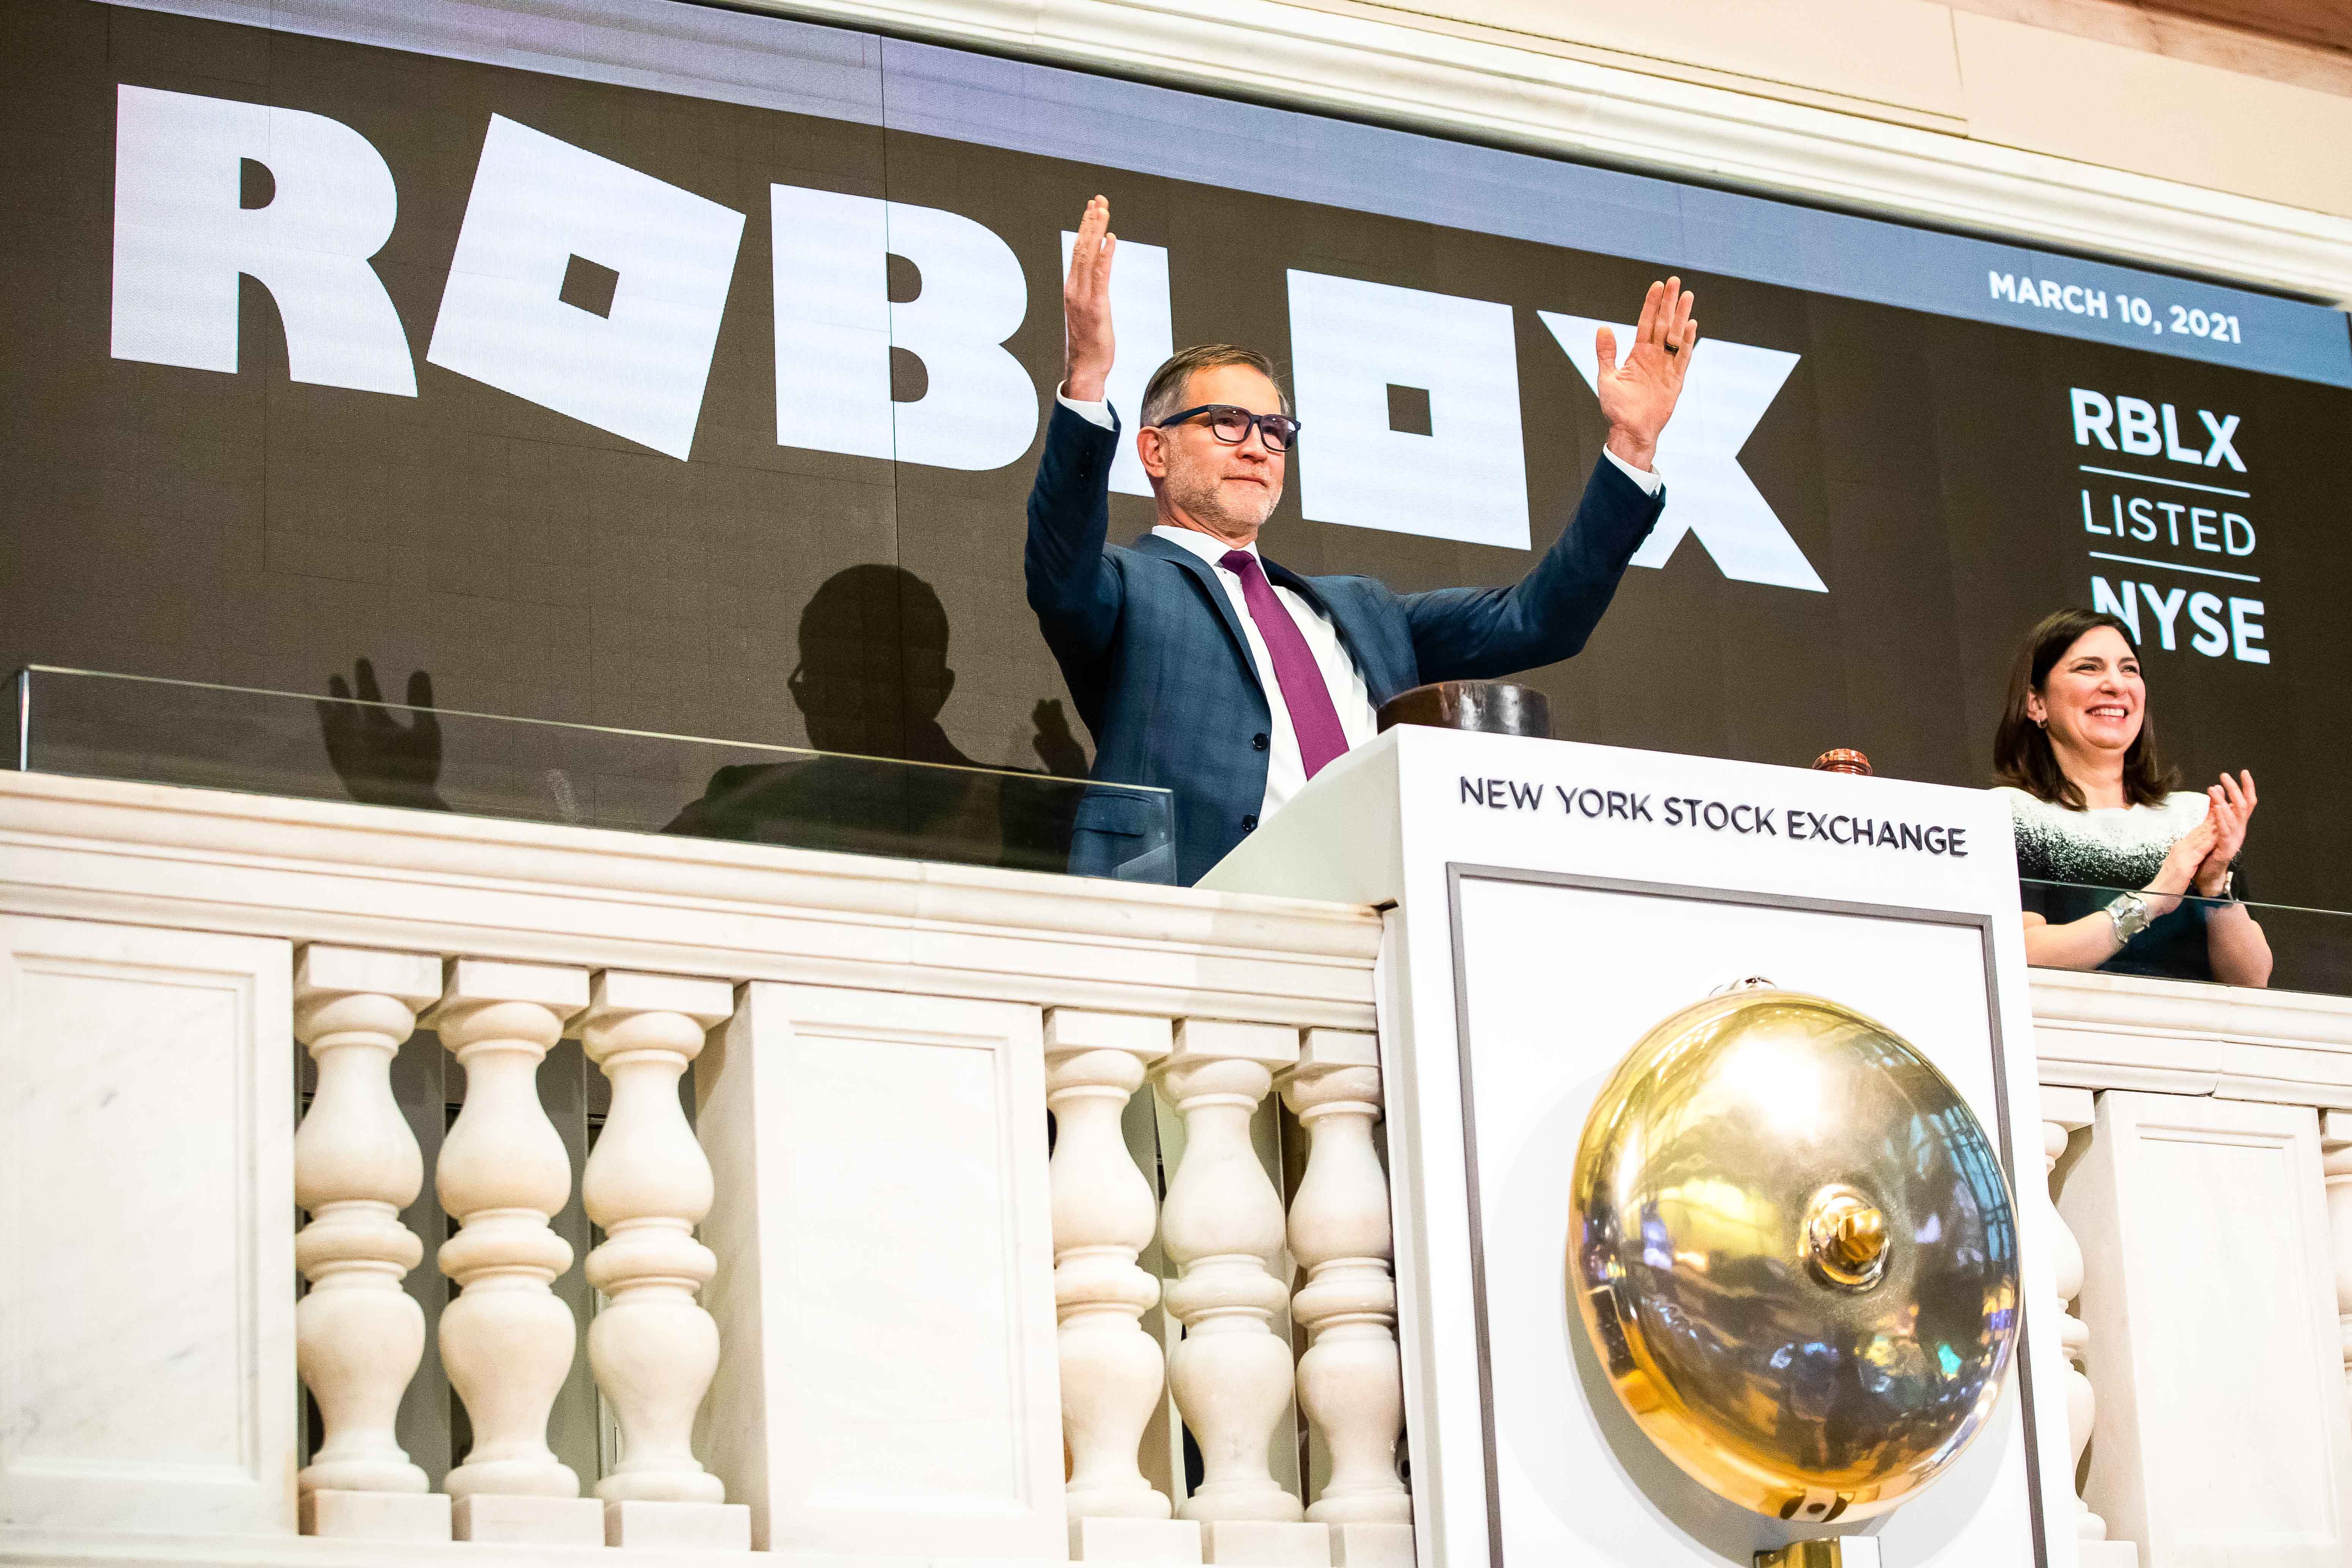 Roblox (RBLX) trades for the first time after direct listing